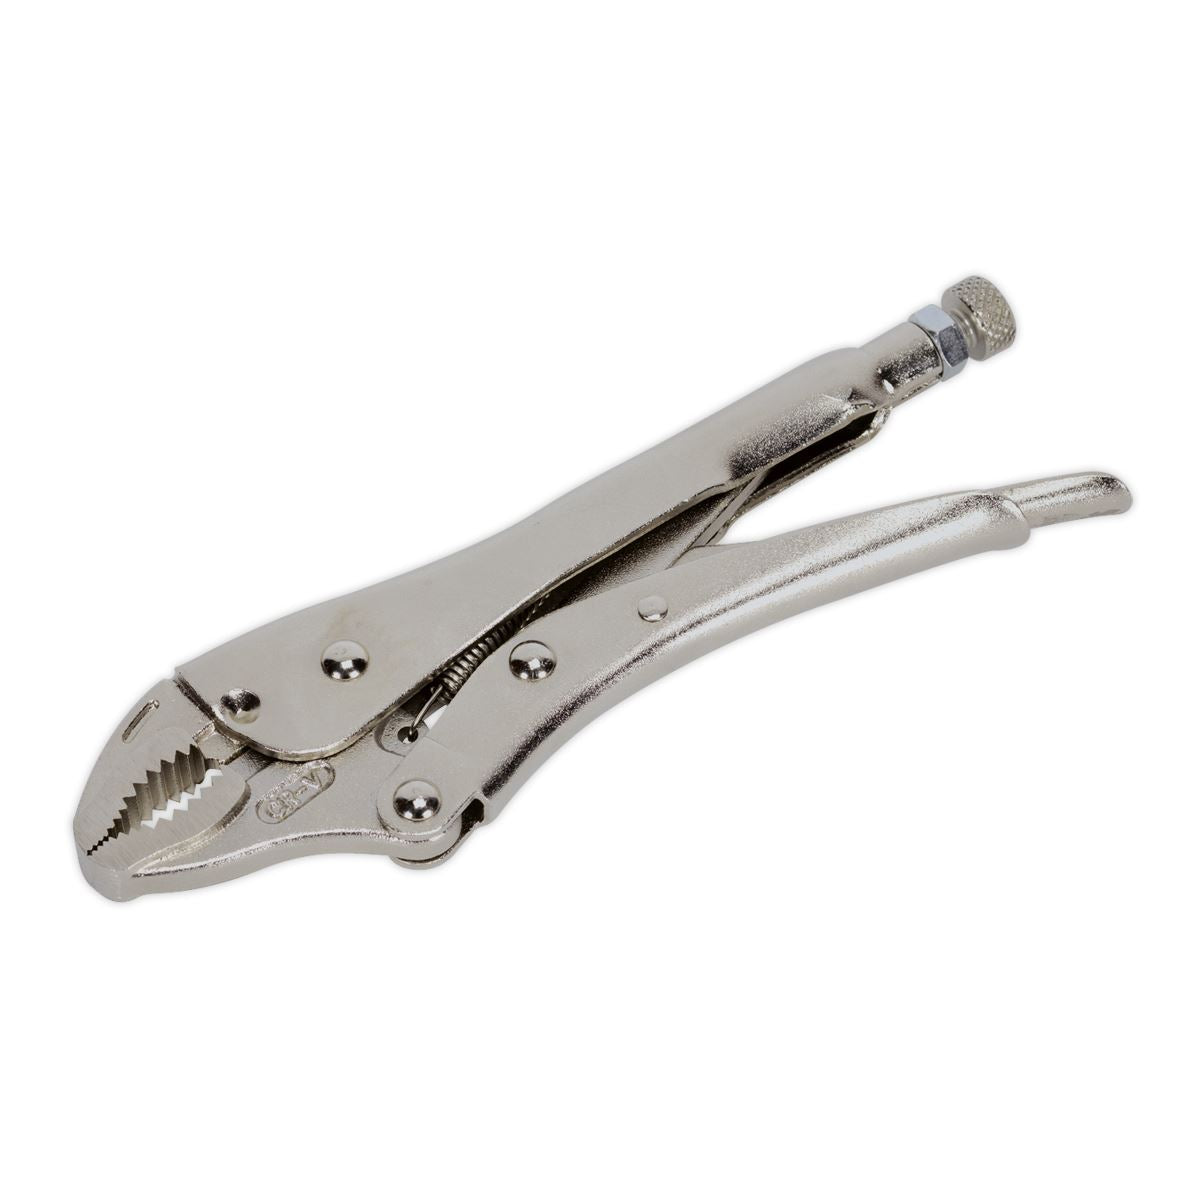 Sealey Premier Locking Pliers Curved Jaws 185mm 0-38mm Capacity